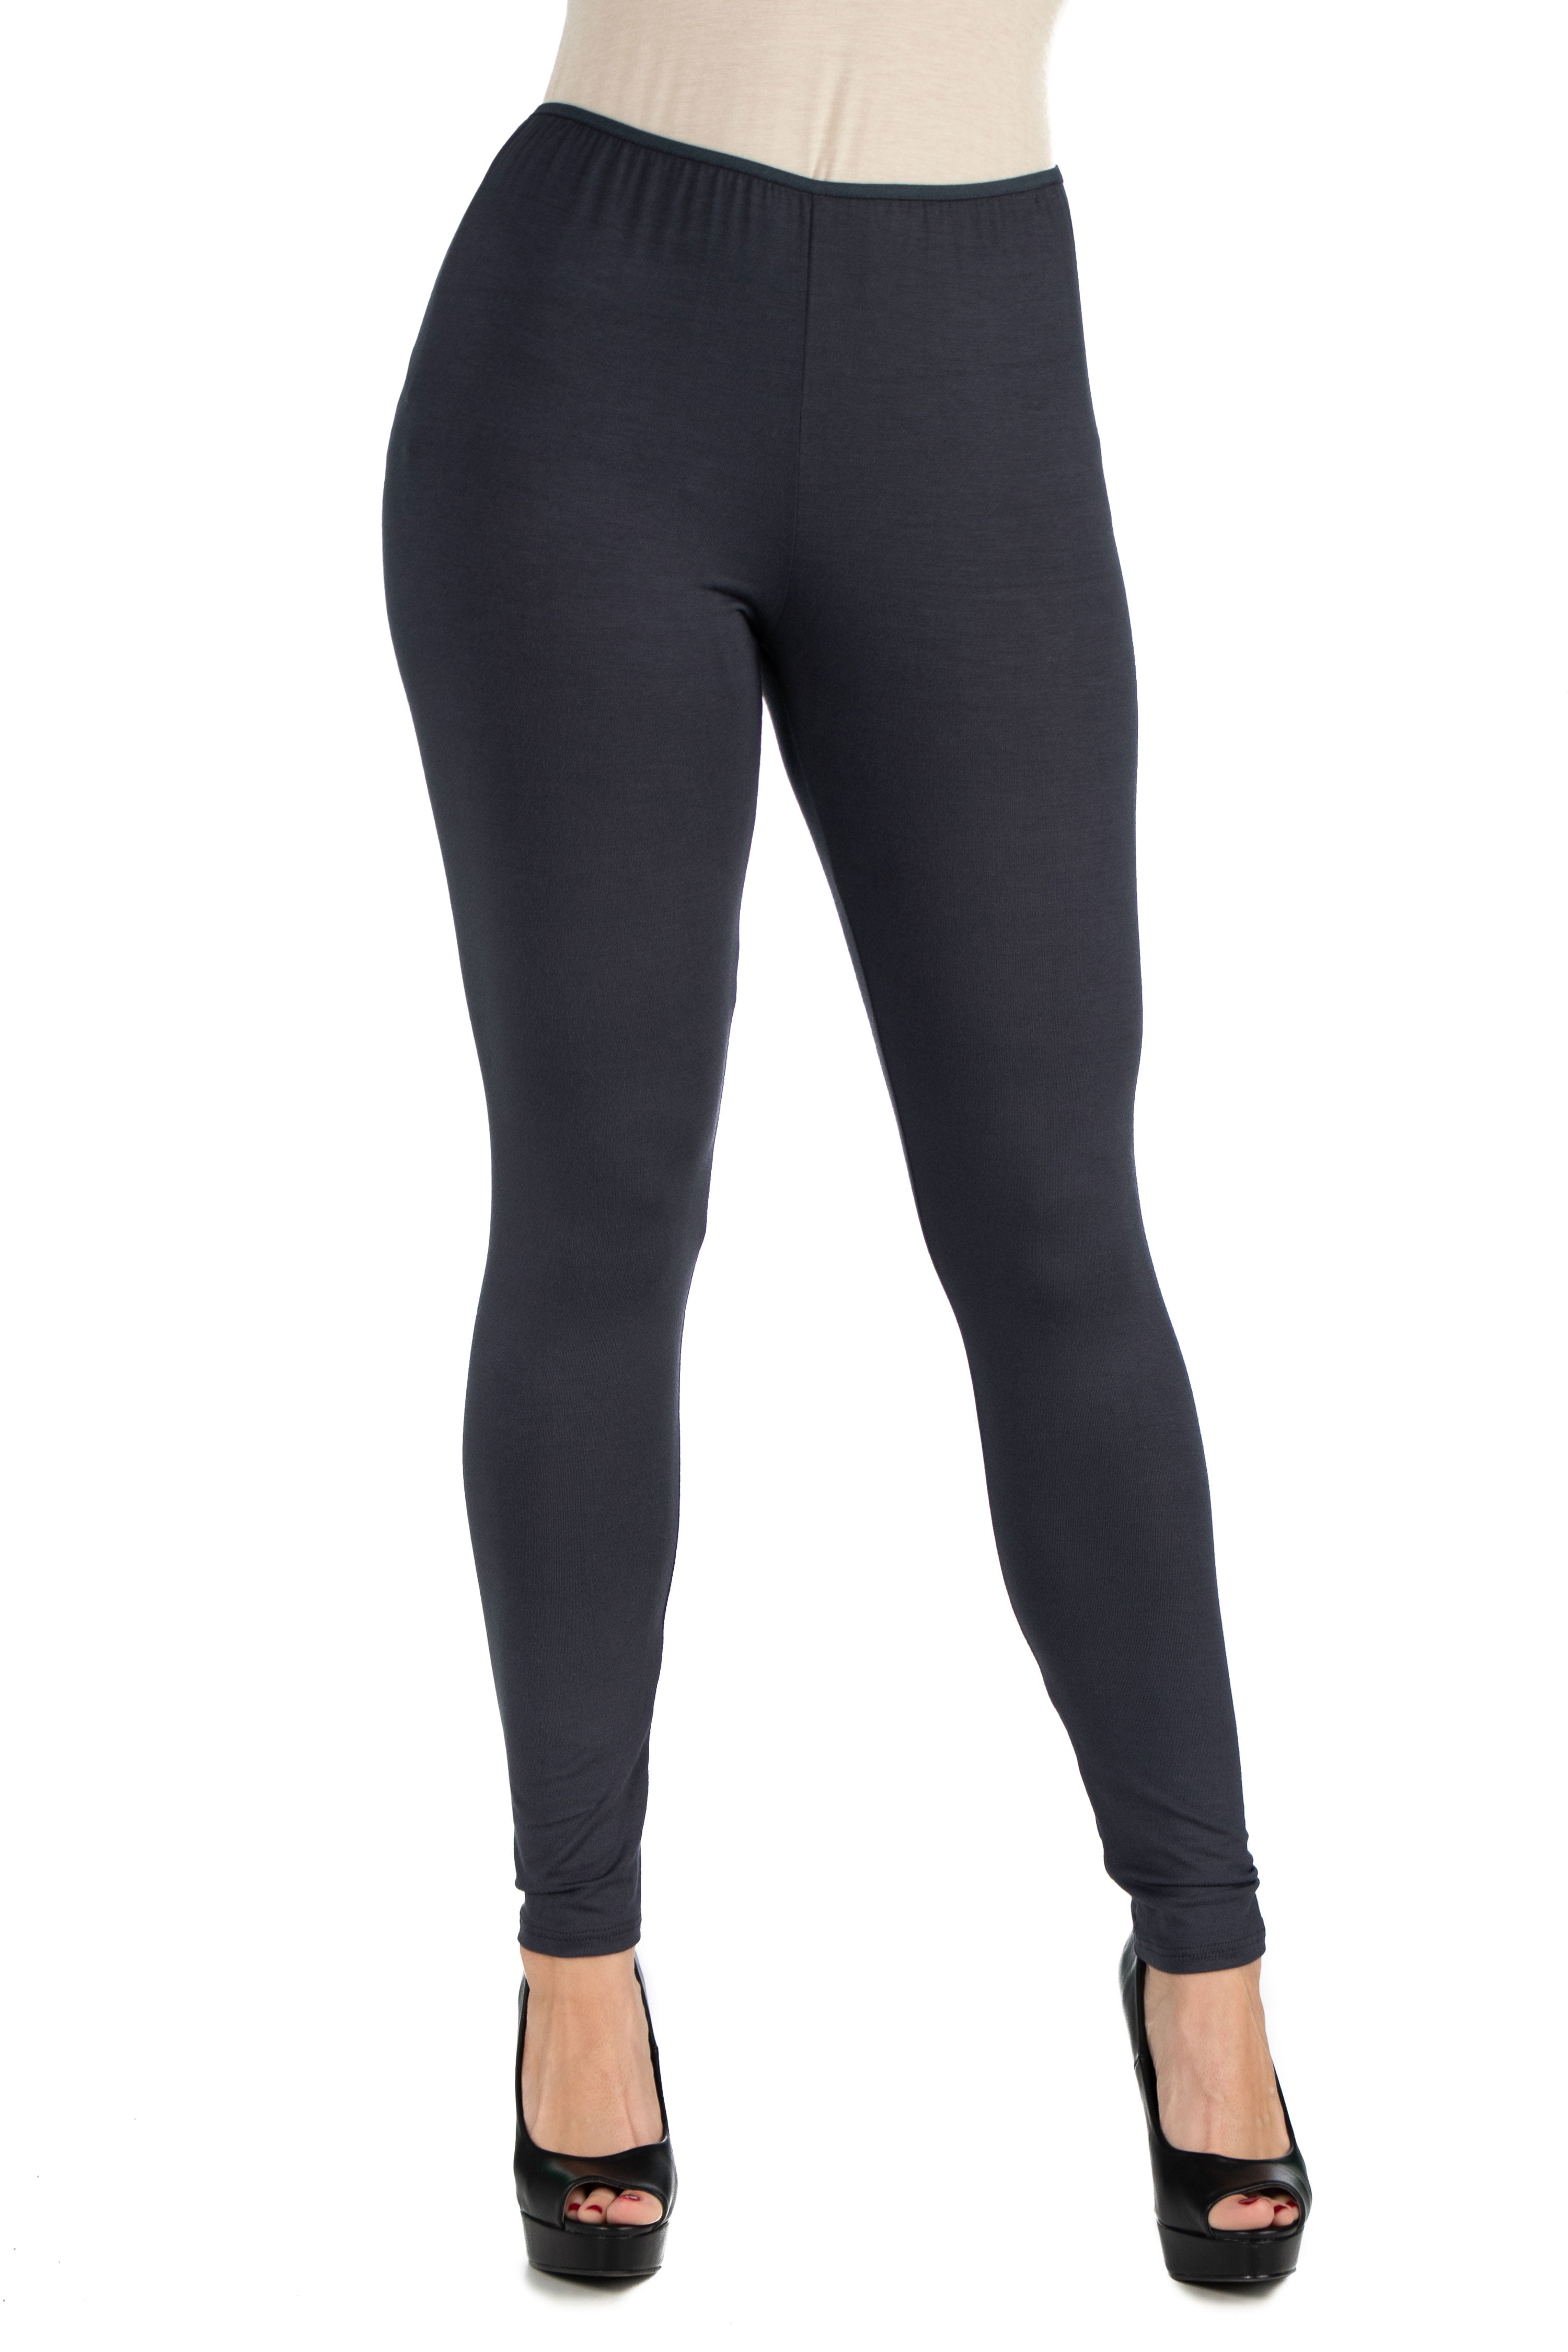  EttelLut - Women's Cotton and Spandex High Waist Leggings Pants  with Full Length - Navy Small : Clothing, Shoes & Jewelry